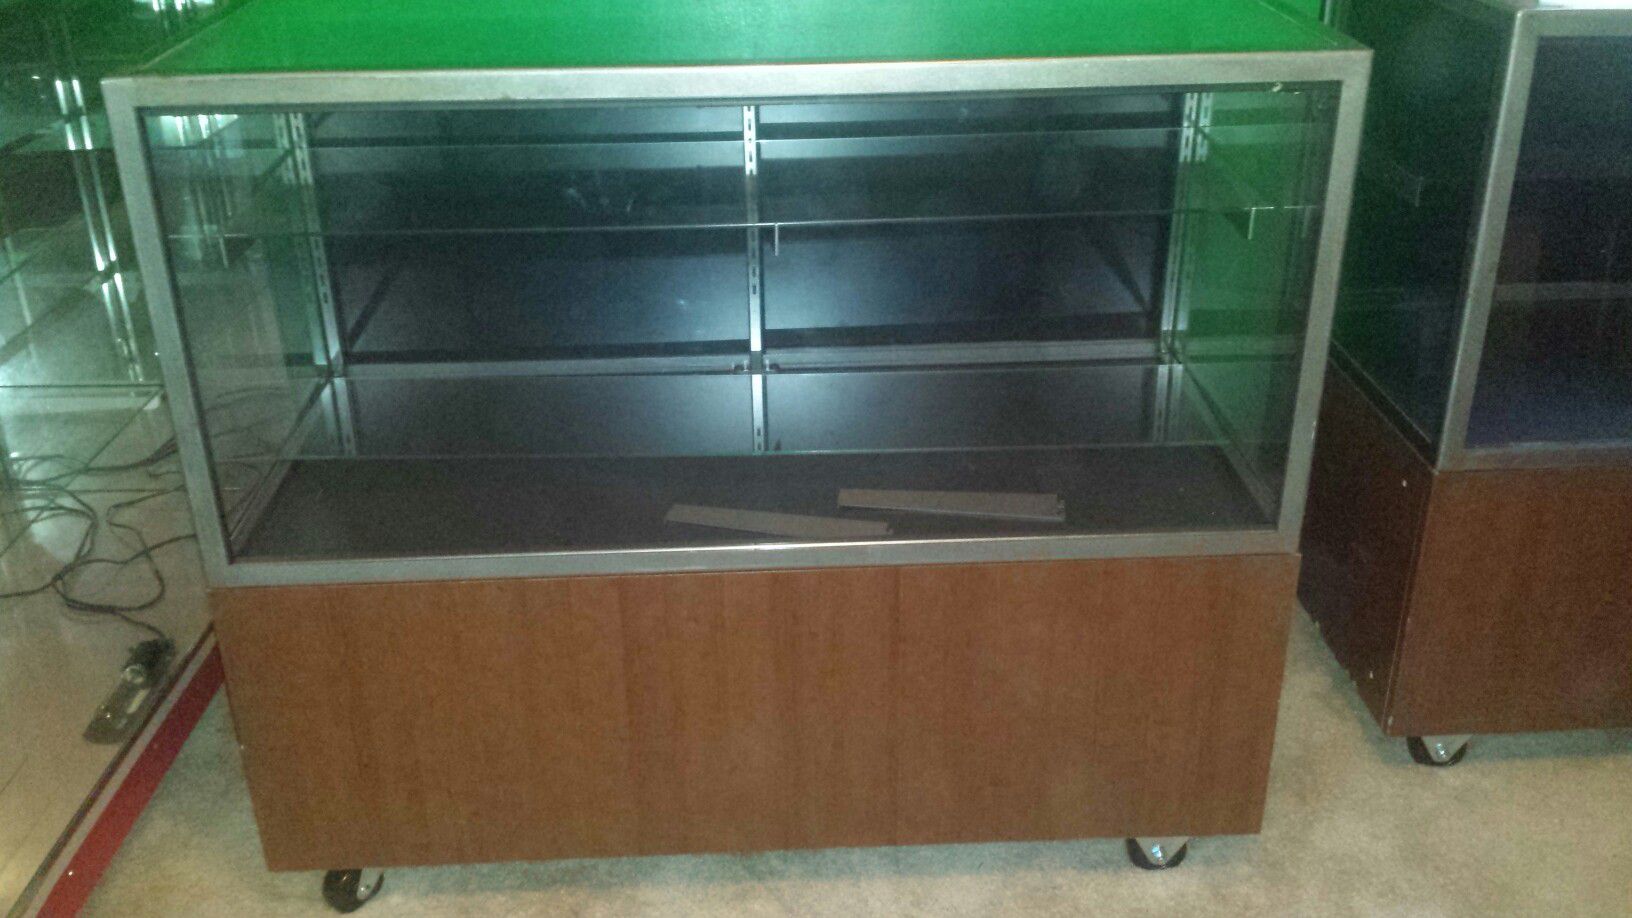 4ft X 2ft X 3ft Display Cases w/ wheels